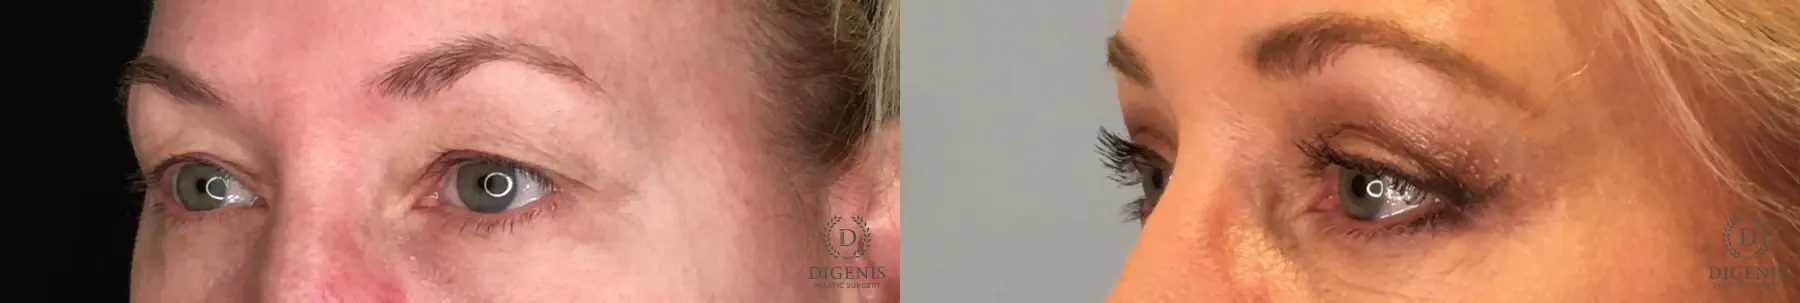 Blepharoplasty: Patient 2 - Before and After 2